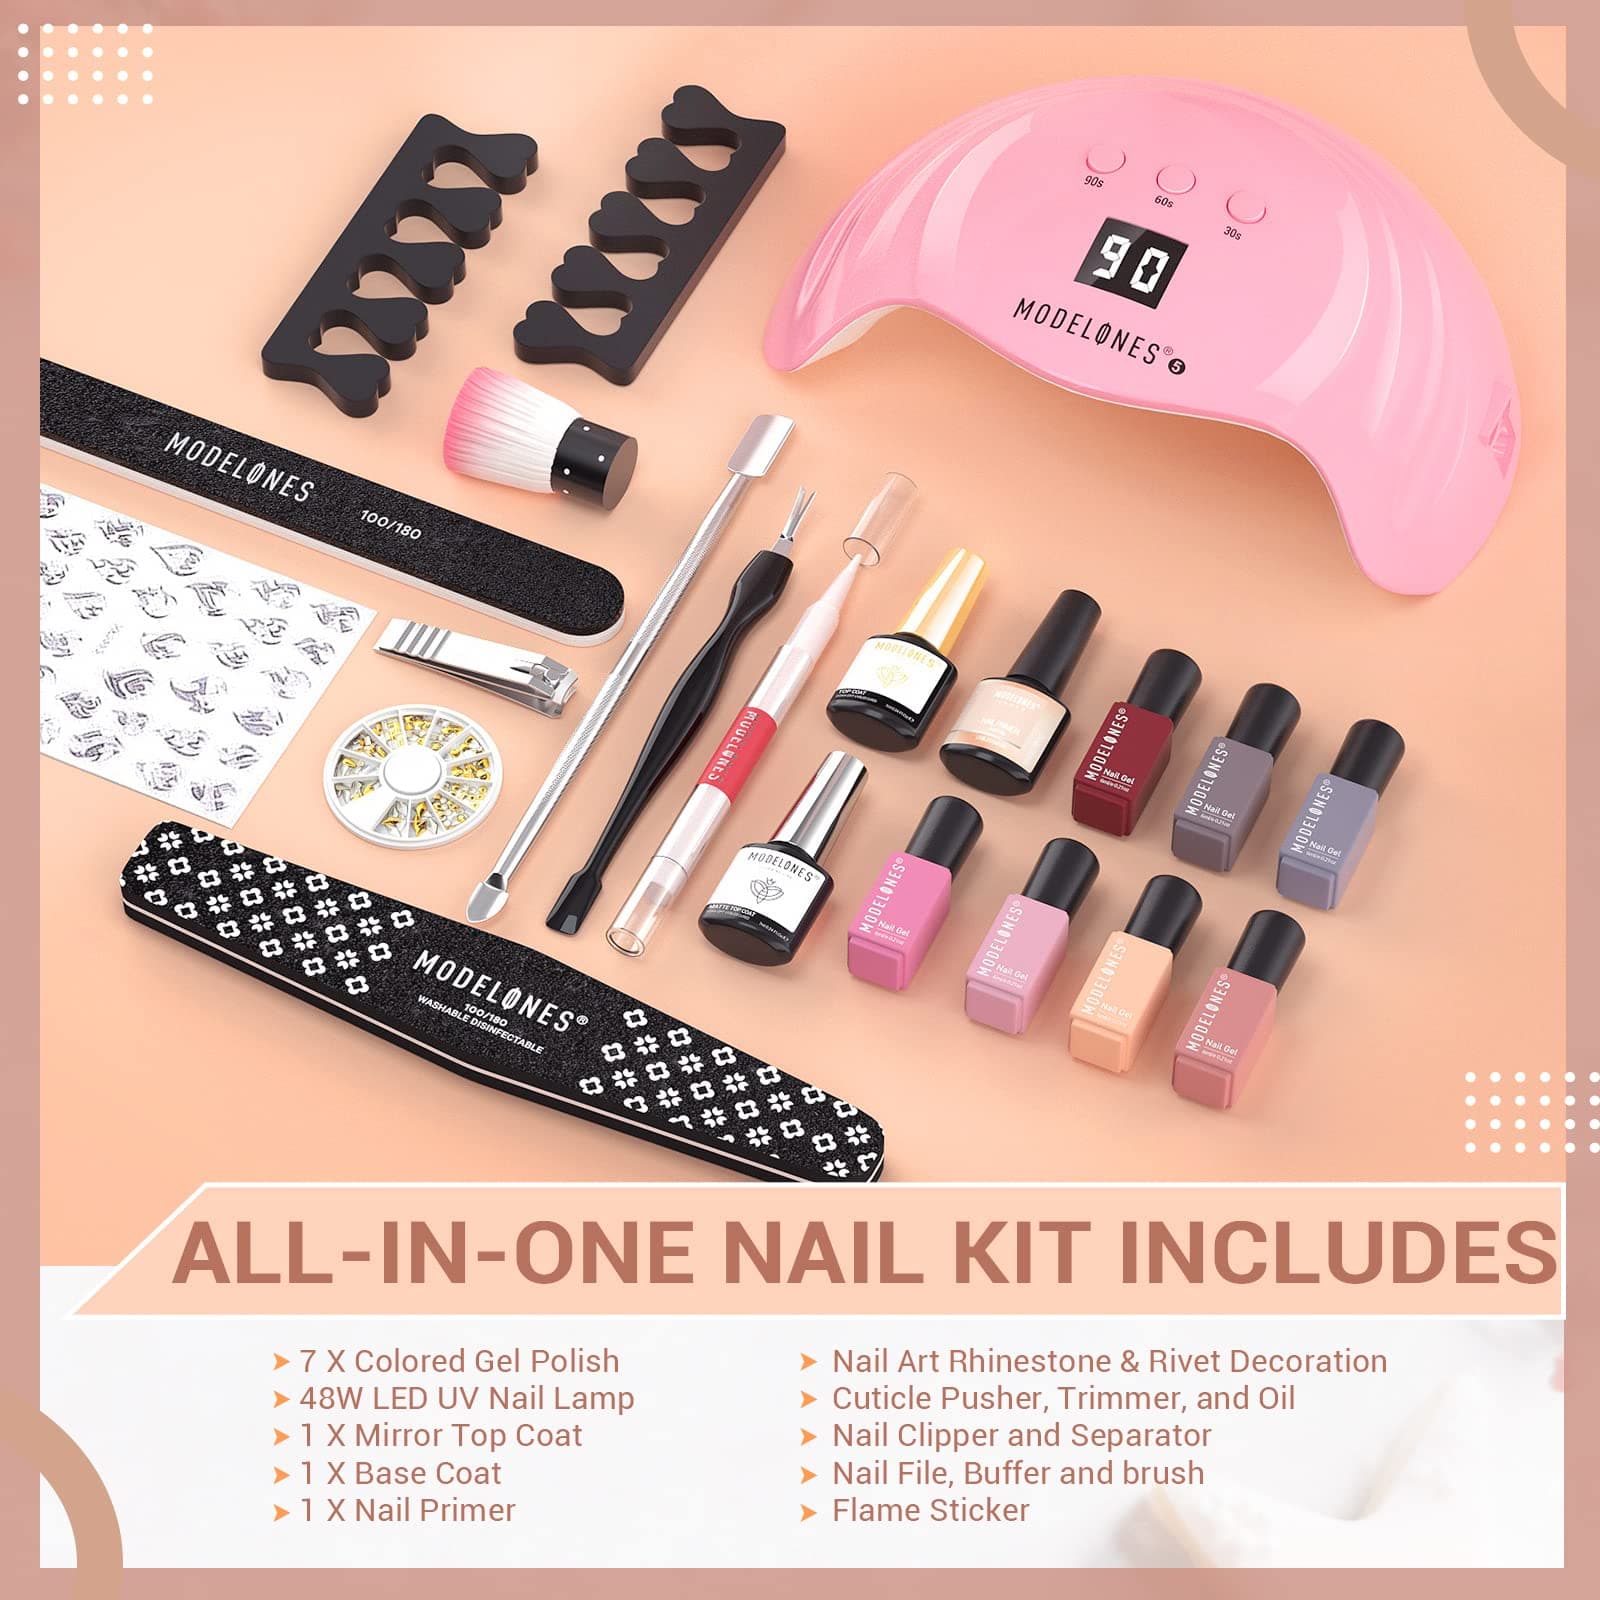 Buy SEMILAC Love Me Professional Gel Nail Starter Kit With UV Nail Lamp, 3  Soak Off Nail Polish Colours, (Red, White & Black), Manicure Tools, Top &  Base Coat, Remover & More